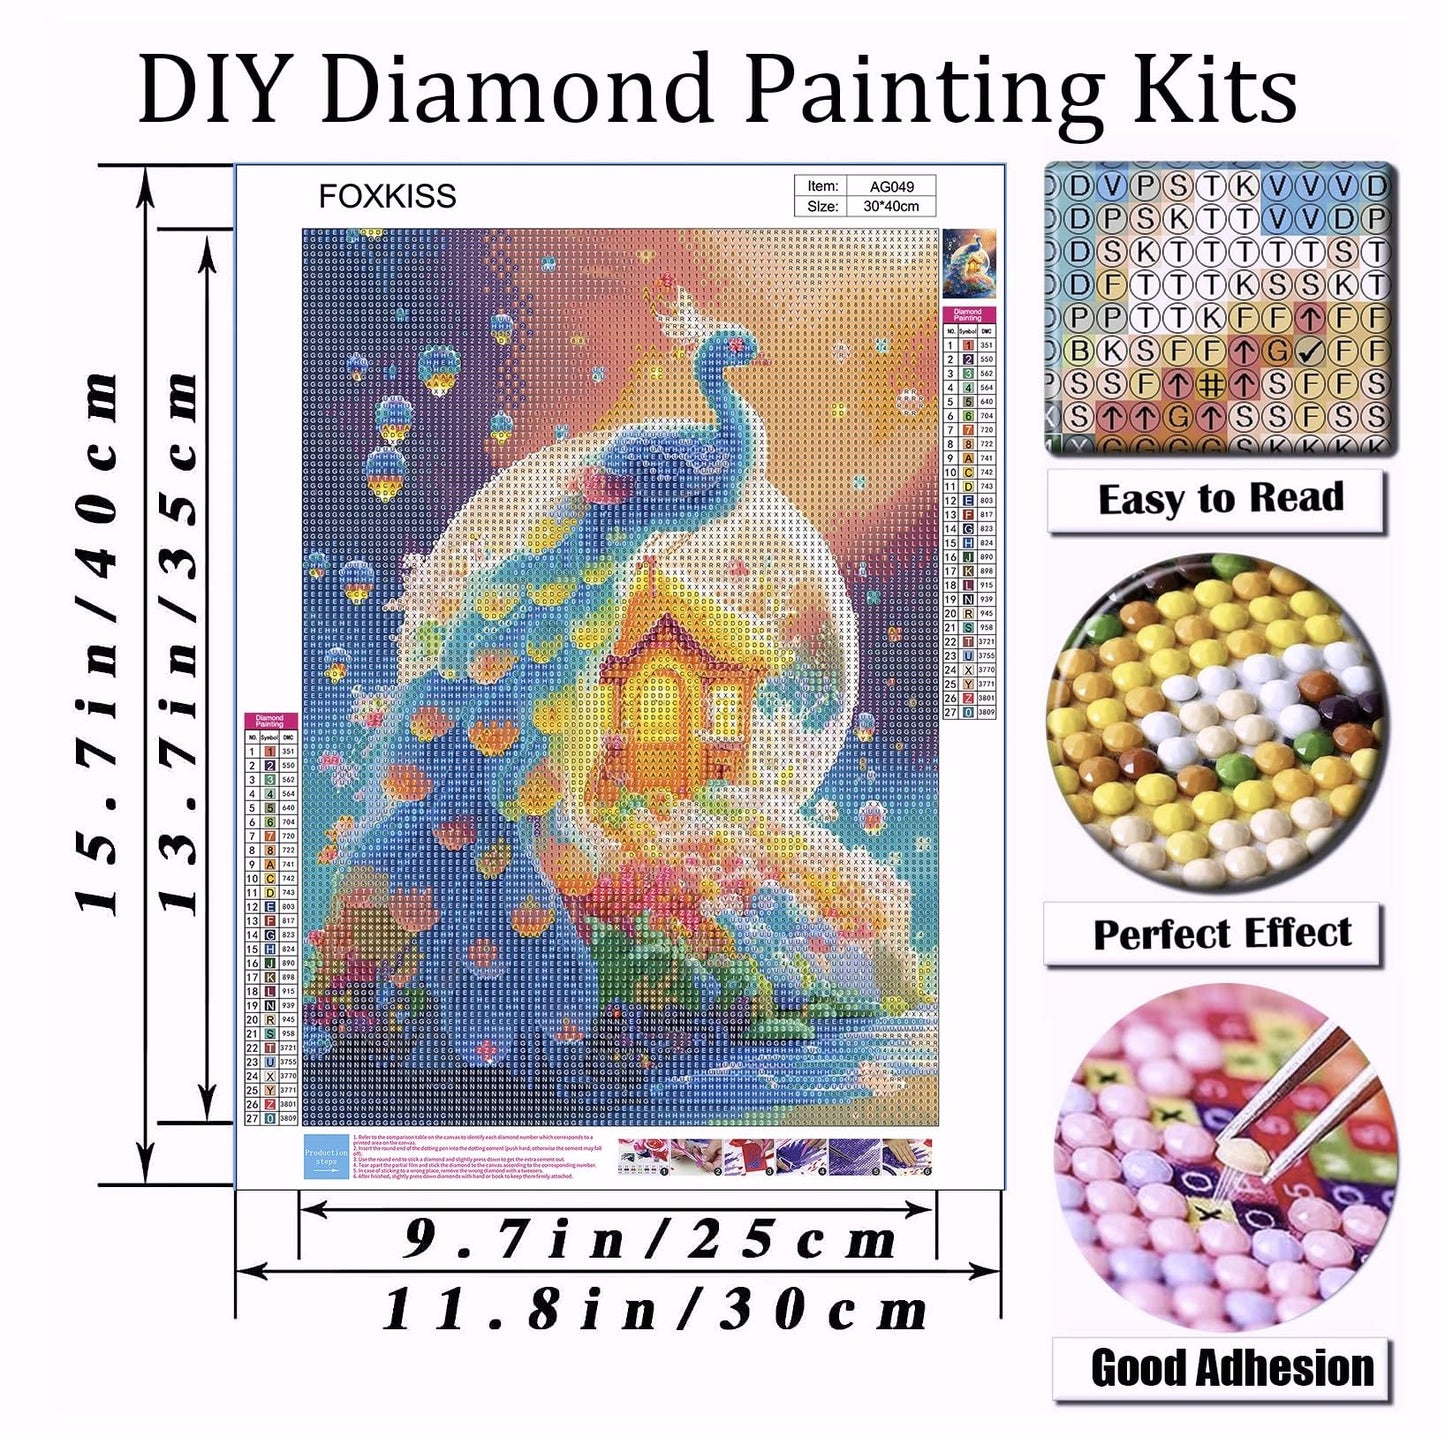 FOXKISS Peacock Diamond Art Painting Kits for Adults, Full Drill Diamond Dots Paintings for Beginners, Round 5D Paint with Diamonds Pictures Gem Art